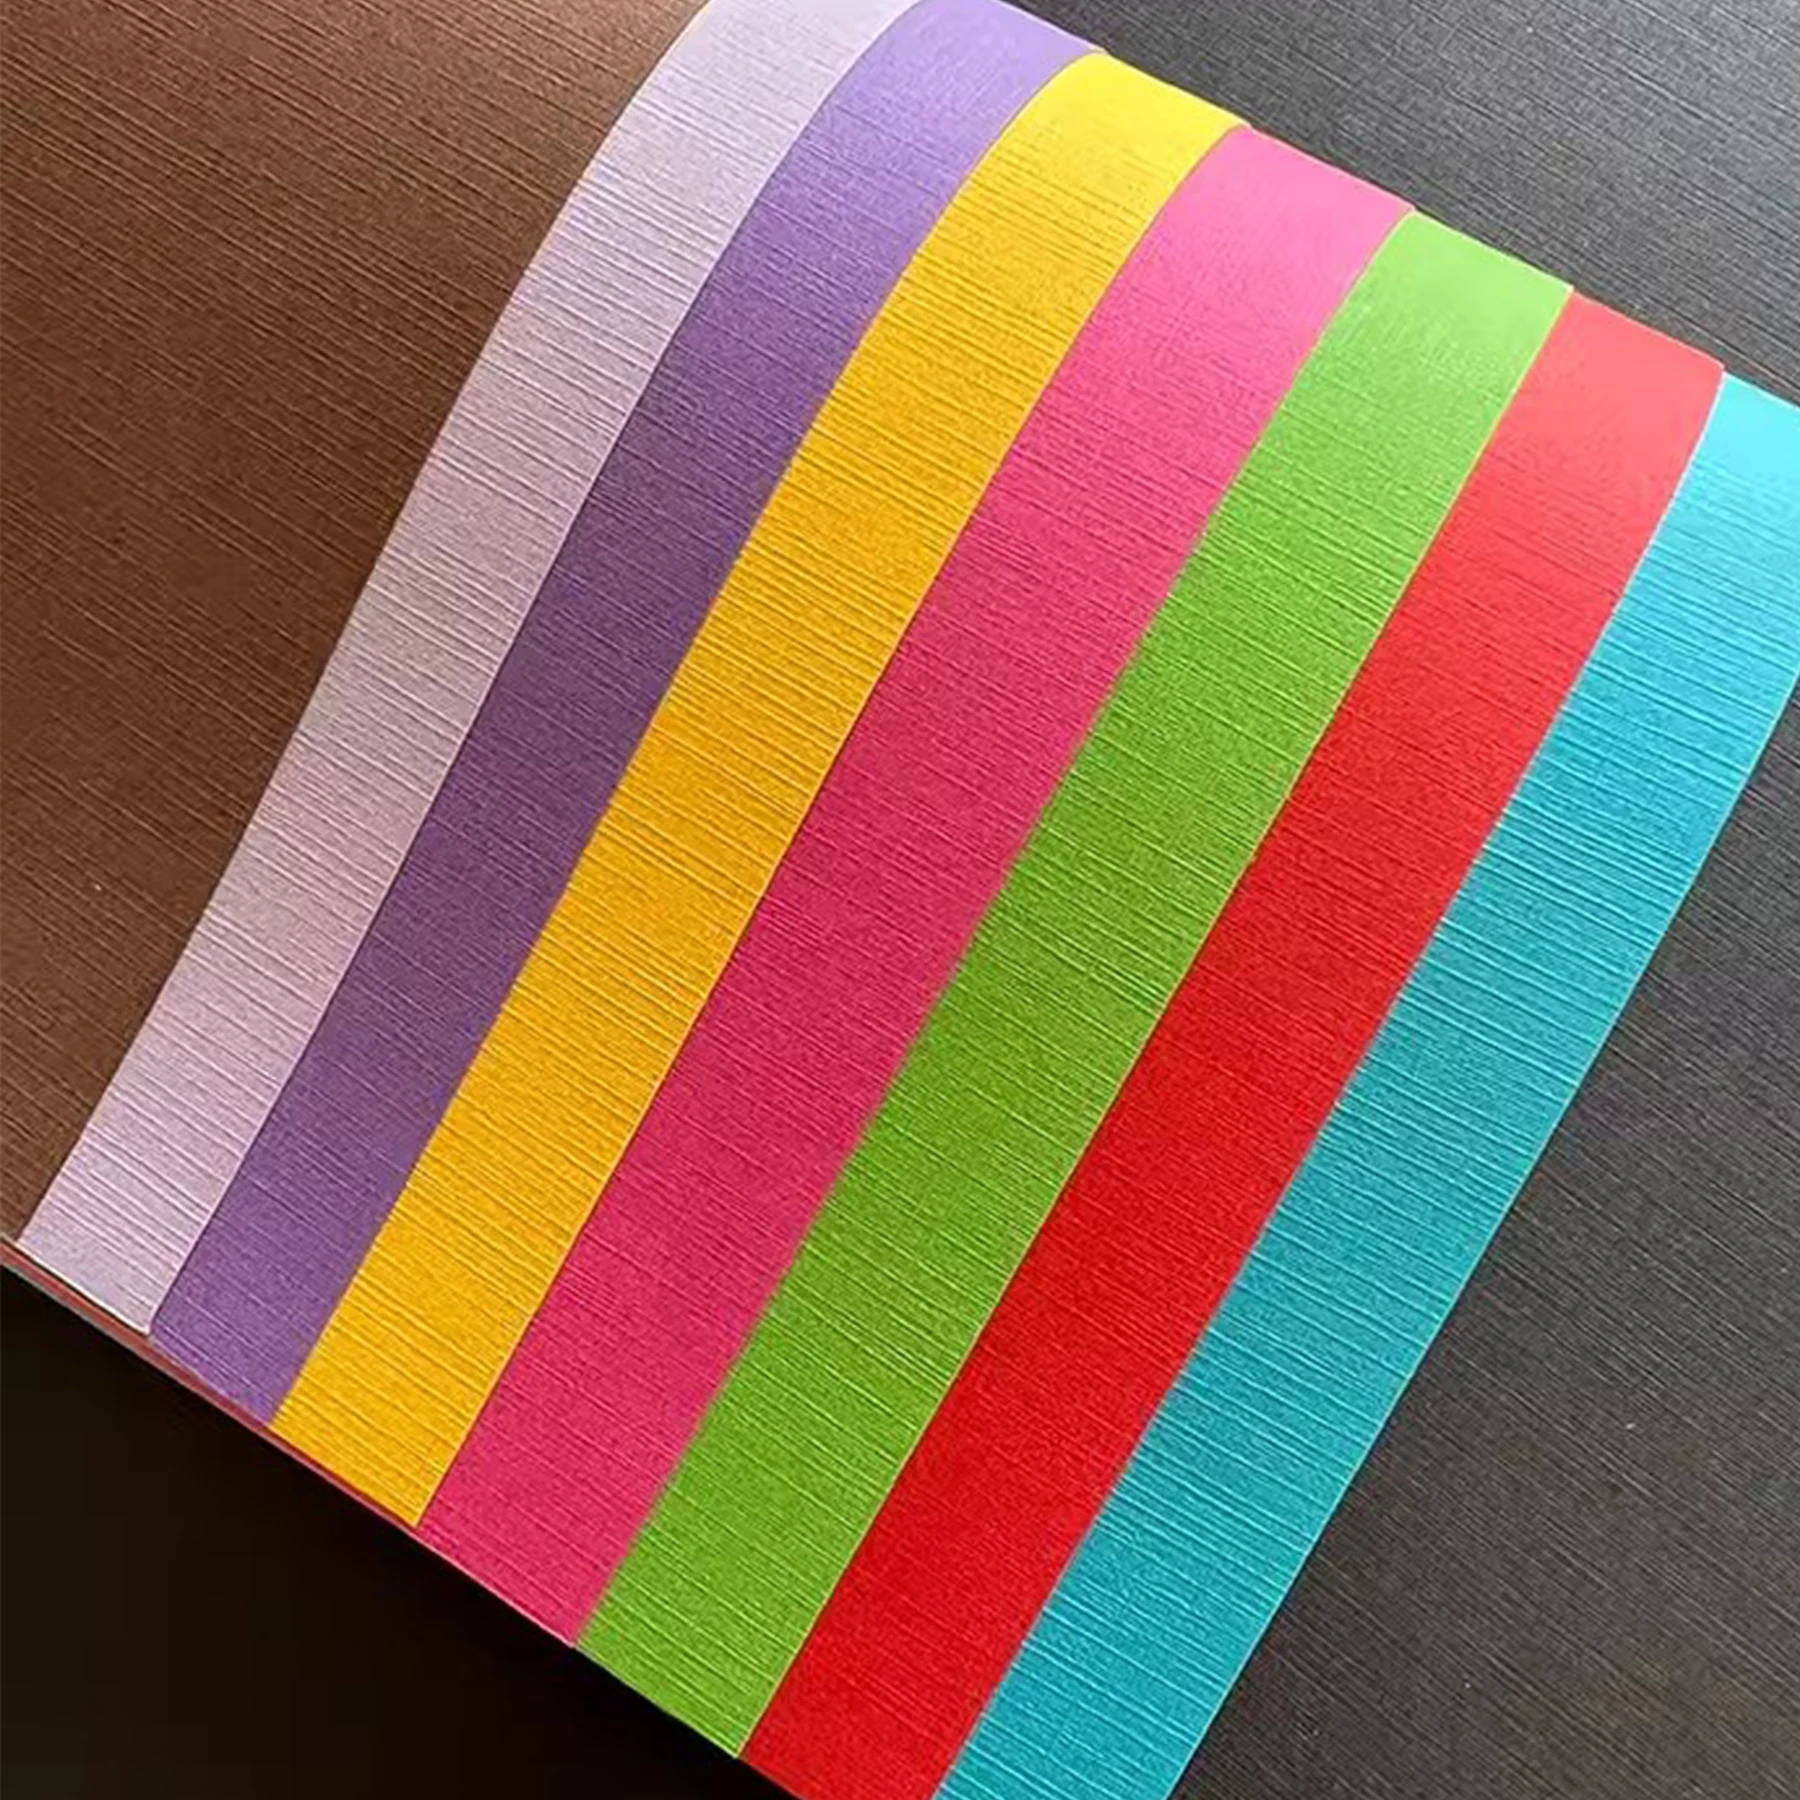 Textured Cardstock Paper, 50 Sheet 230gsm Faint Texture Colored Paper,  Double-Sided Printed , Premium Craft Thick Paper - AliExpress